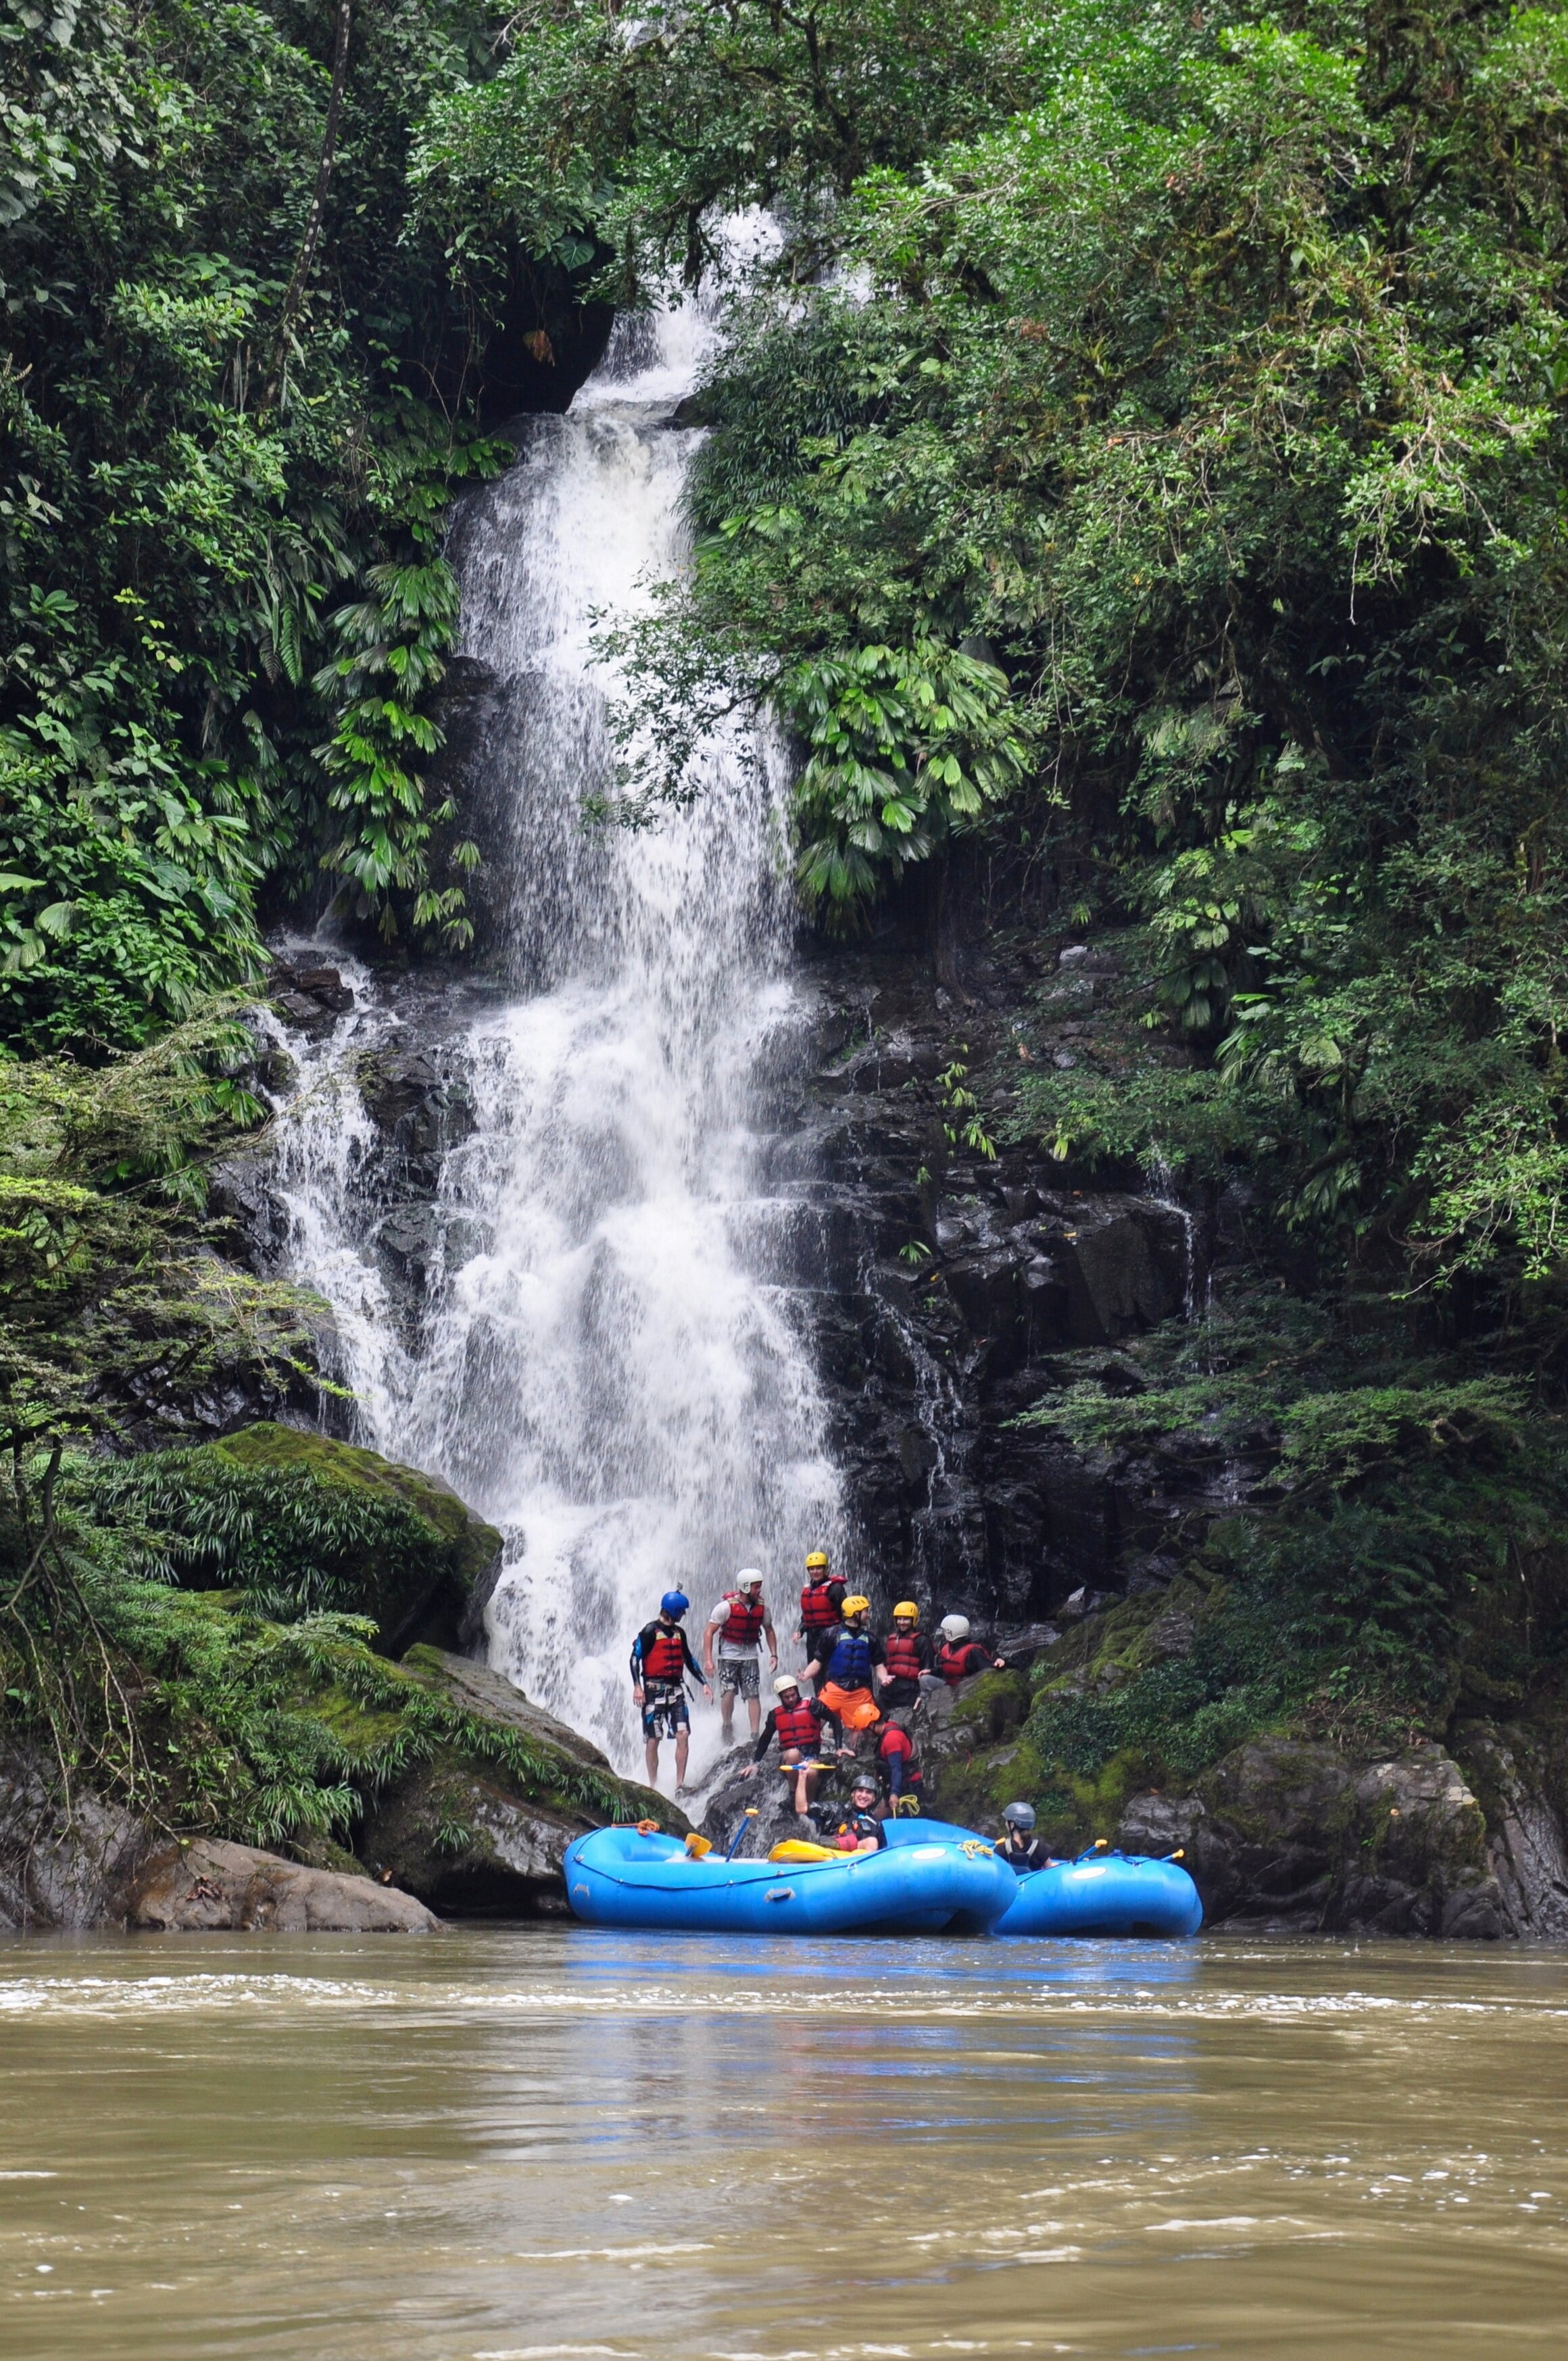 Rafting in the Rio Cuyes